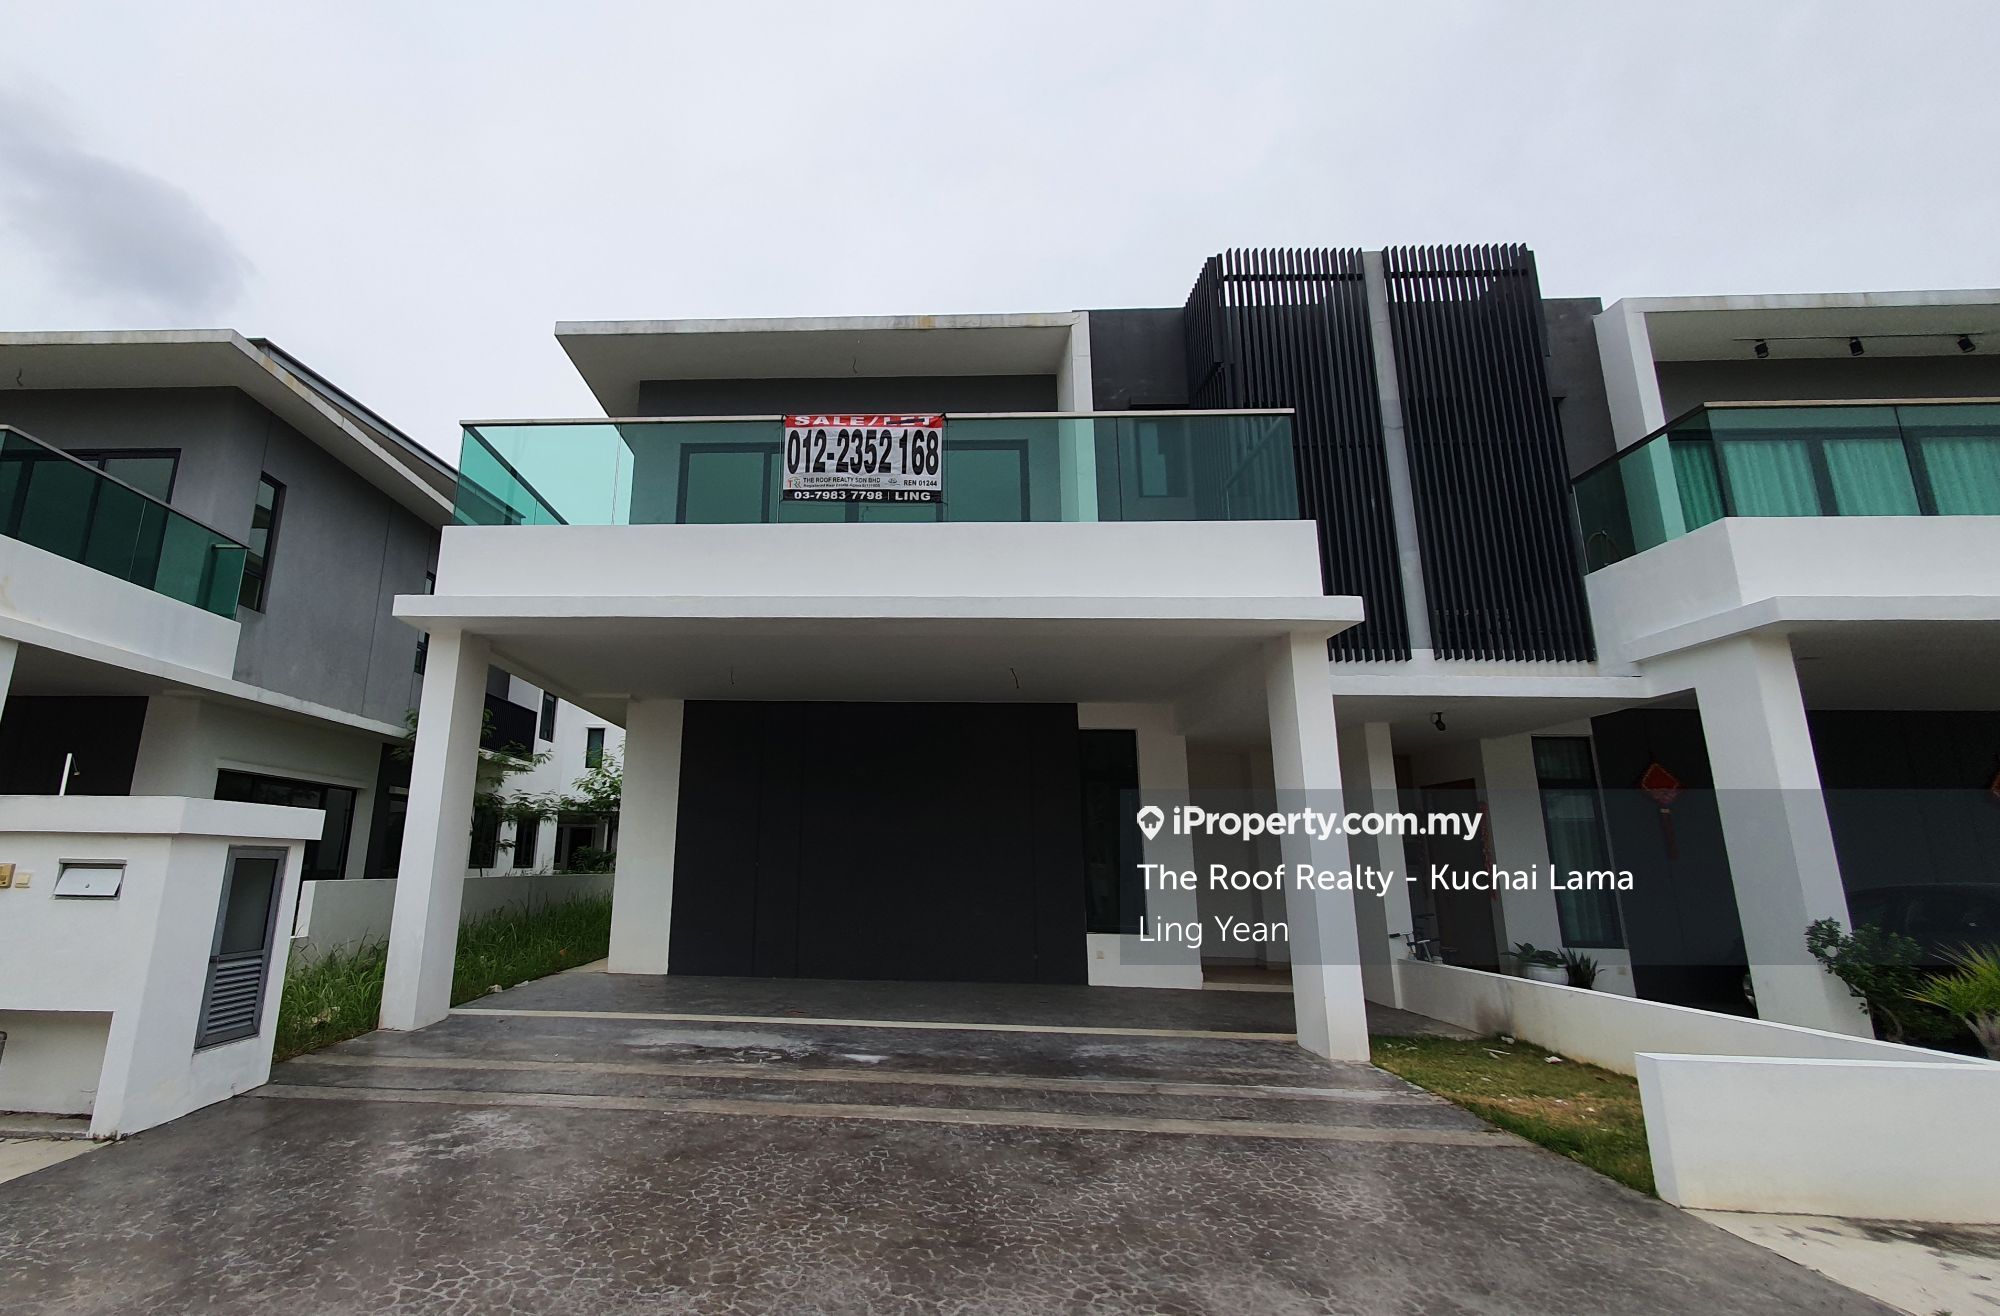 D'Island Residence, Puchong